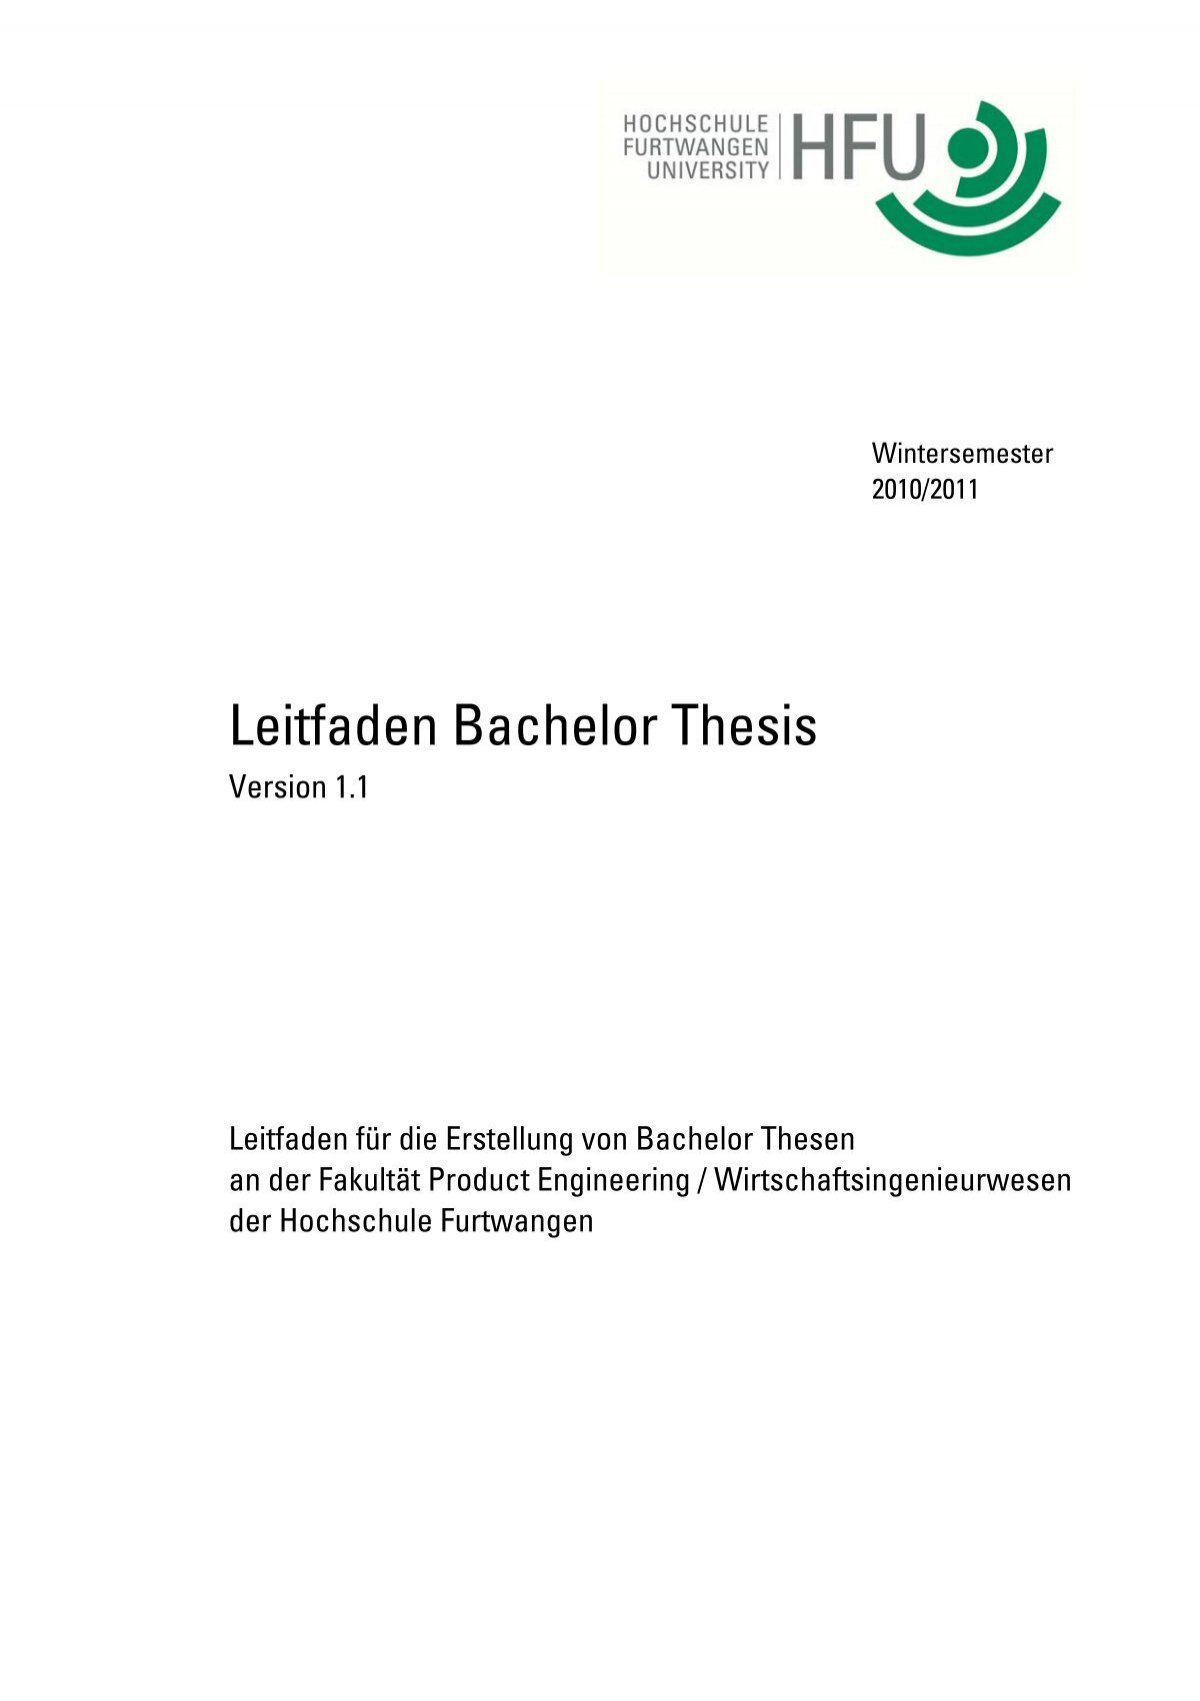 bachelor thesis in 30 tagen